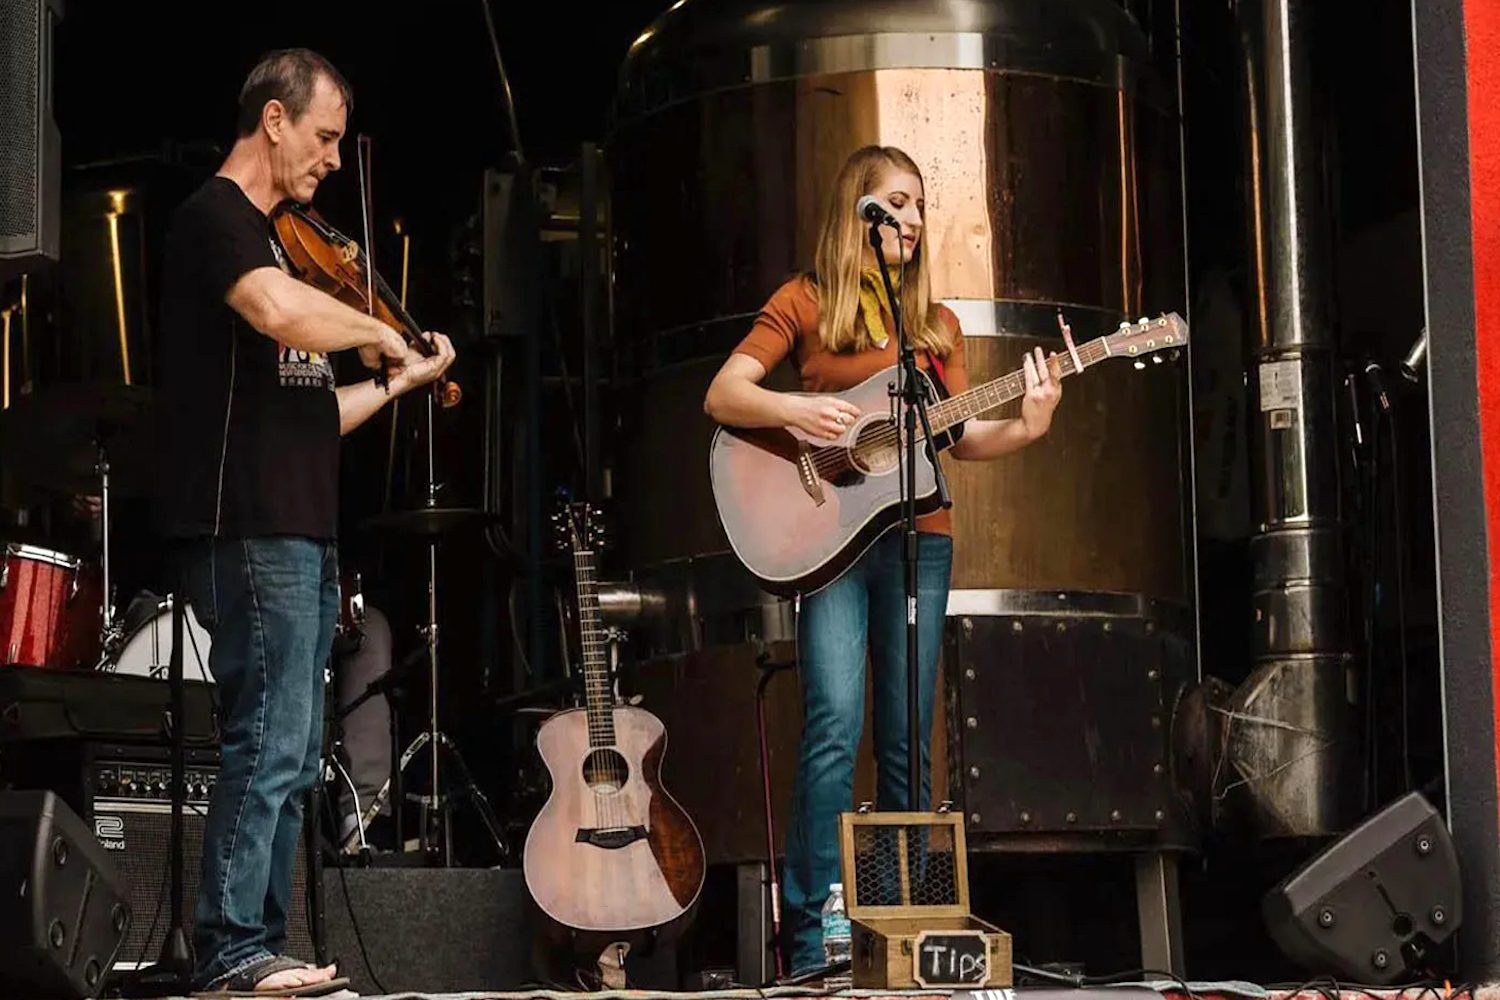 The Country Music and Craft Beer Fest